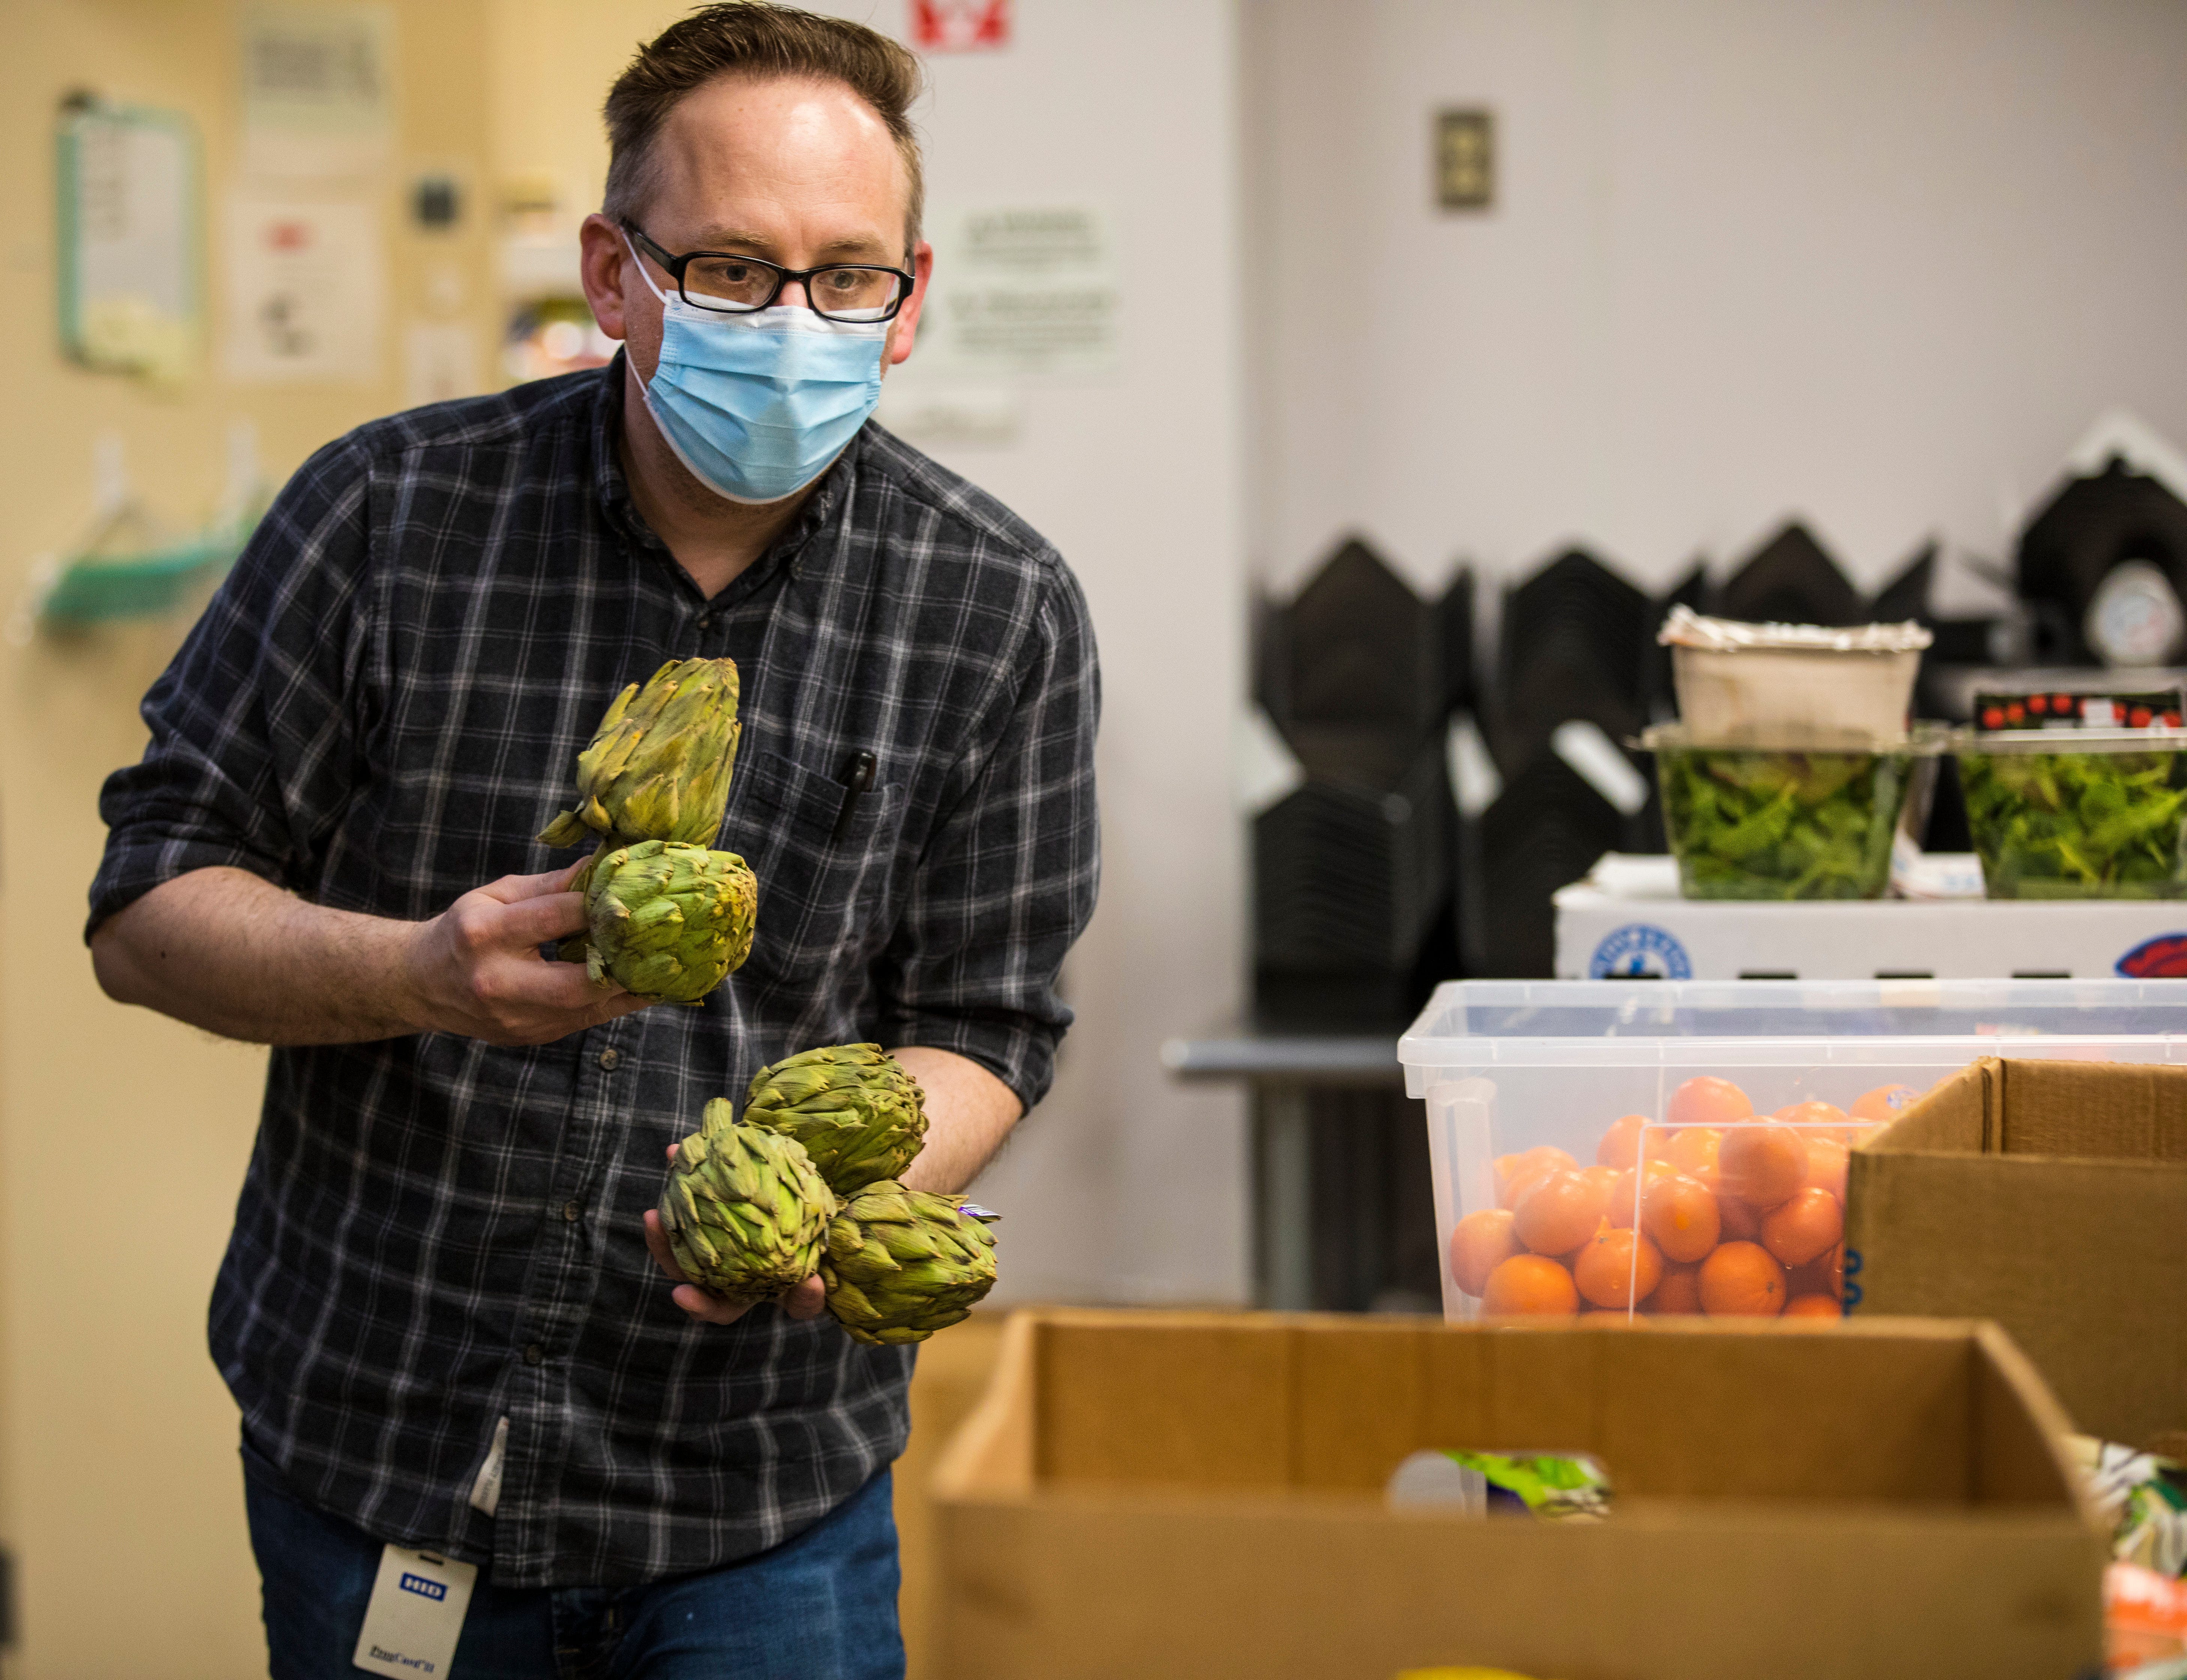 Jay Olzak, food service director at St. Anthony Center, takes the artichokes out of a donation box and immediately starts thinking about how he can prepare them. He thinks about butter, a zest of orange. Olzak is adamant that those who are homeless or struggling still deserve good food.